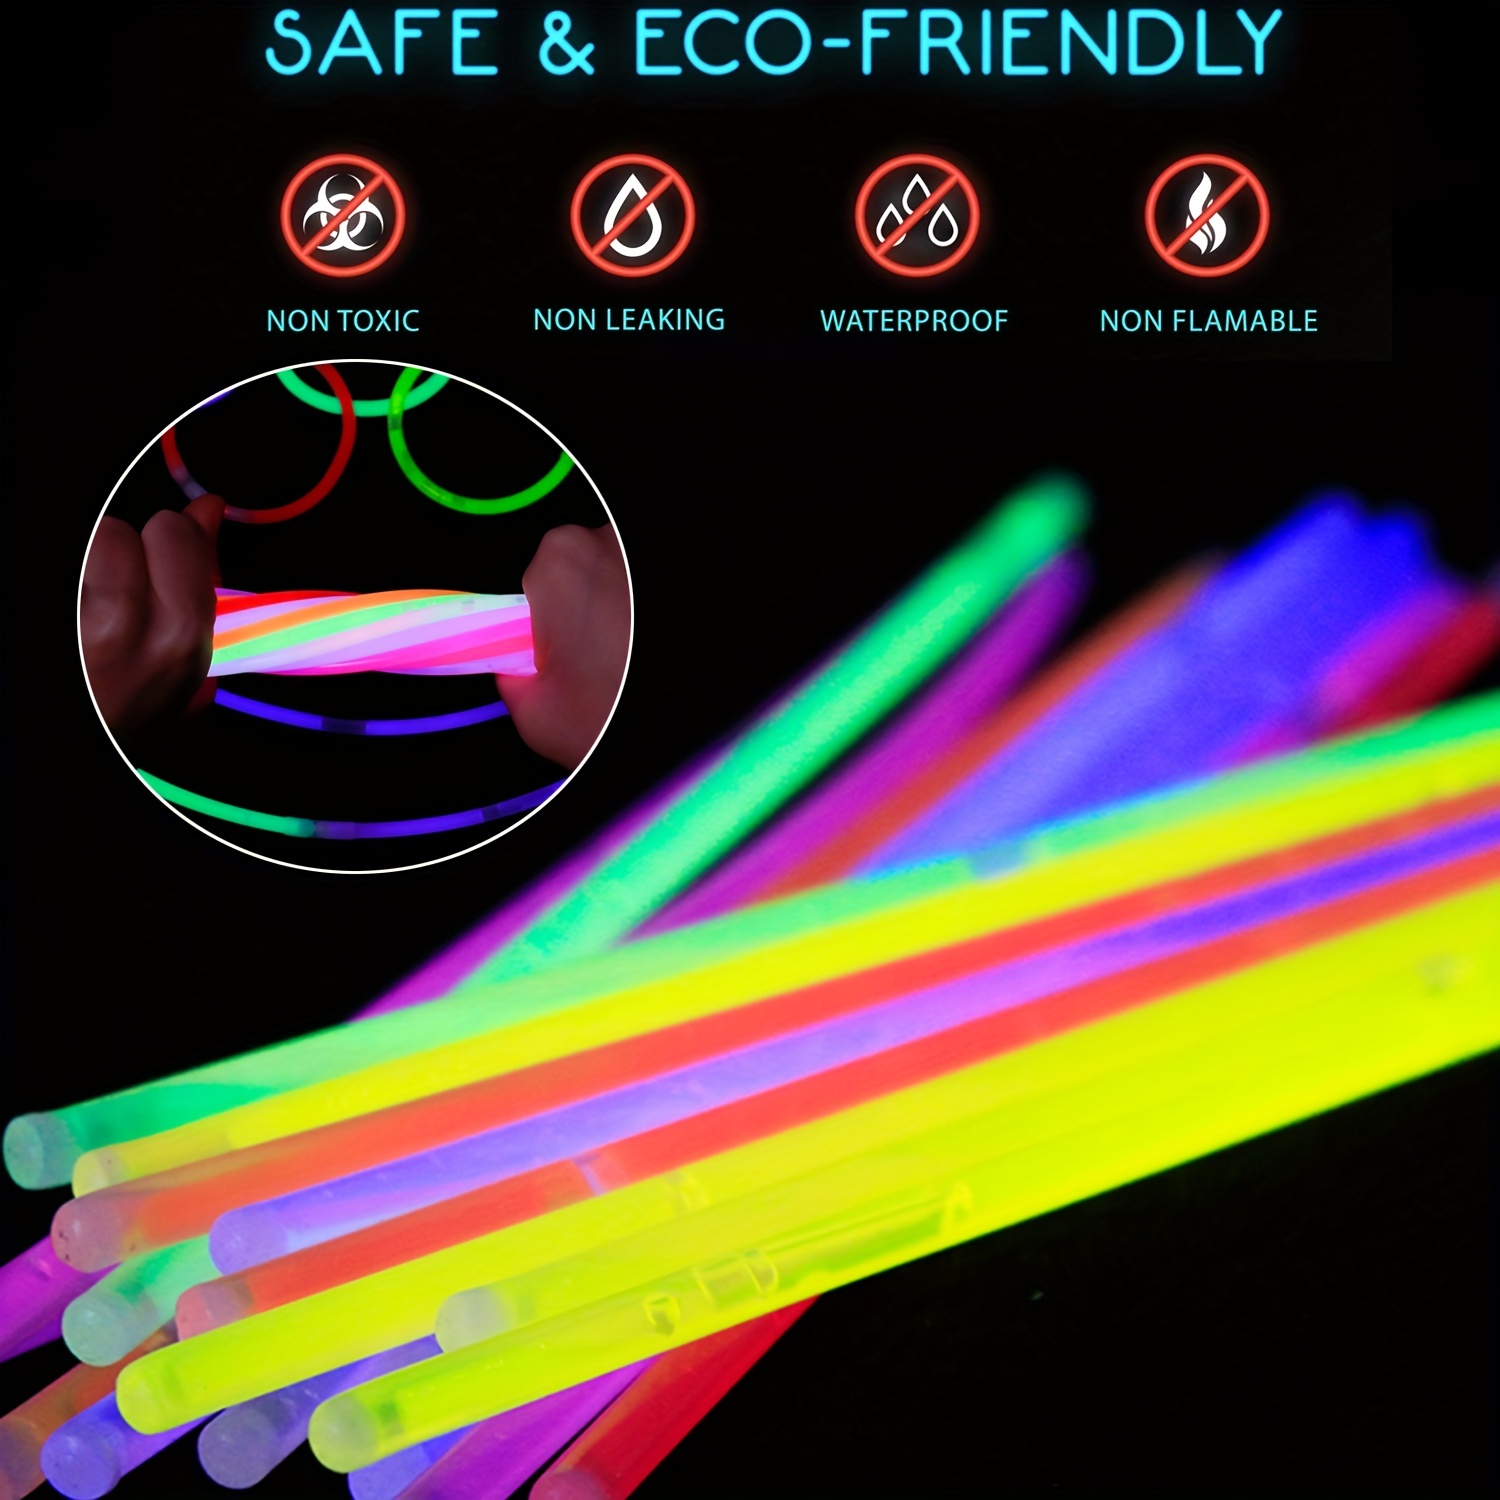 Partysticks Glow Sticks Party Supplies 100/200pcs - 8 Inch Glow In The Dark  Light Up Sticks Party Favors, Glow Party Decorations, Neon Party Glow Neck